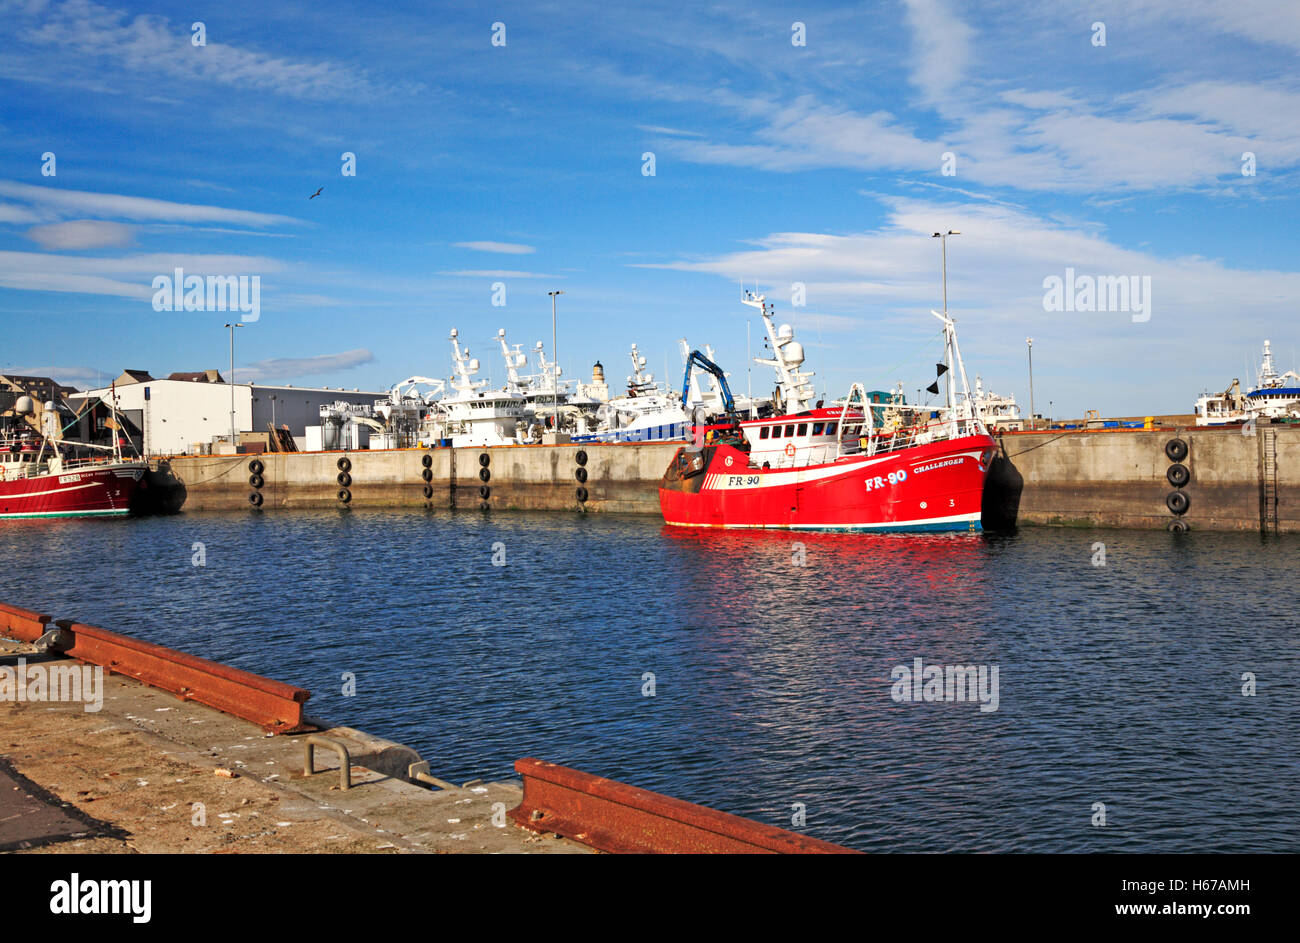 A seagoing vessel at berth in the harbour at Fraserburgh, Aberdeenshire, Scotland, United Kingdom, UK. Stock Photo